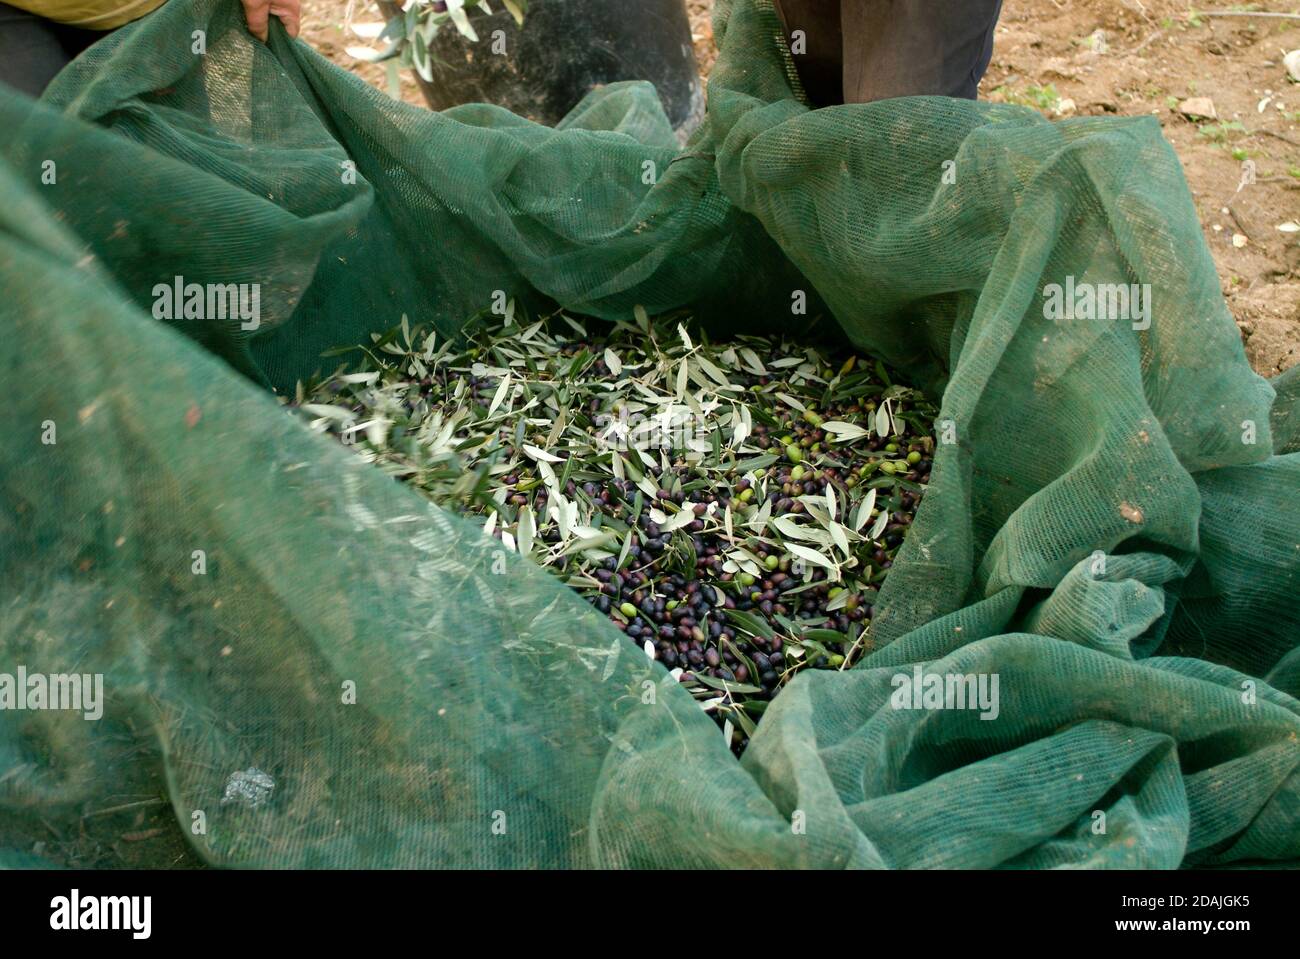 Harvesting of fresh olives in green nets from farmers in an olive tree field in Italy for the production of virgin olive oil Stock Photo